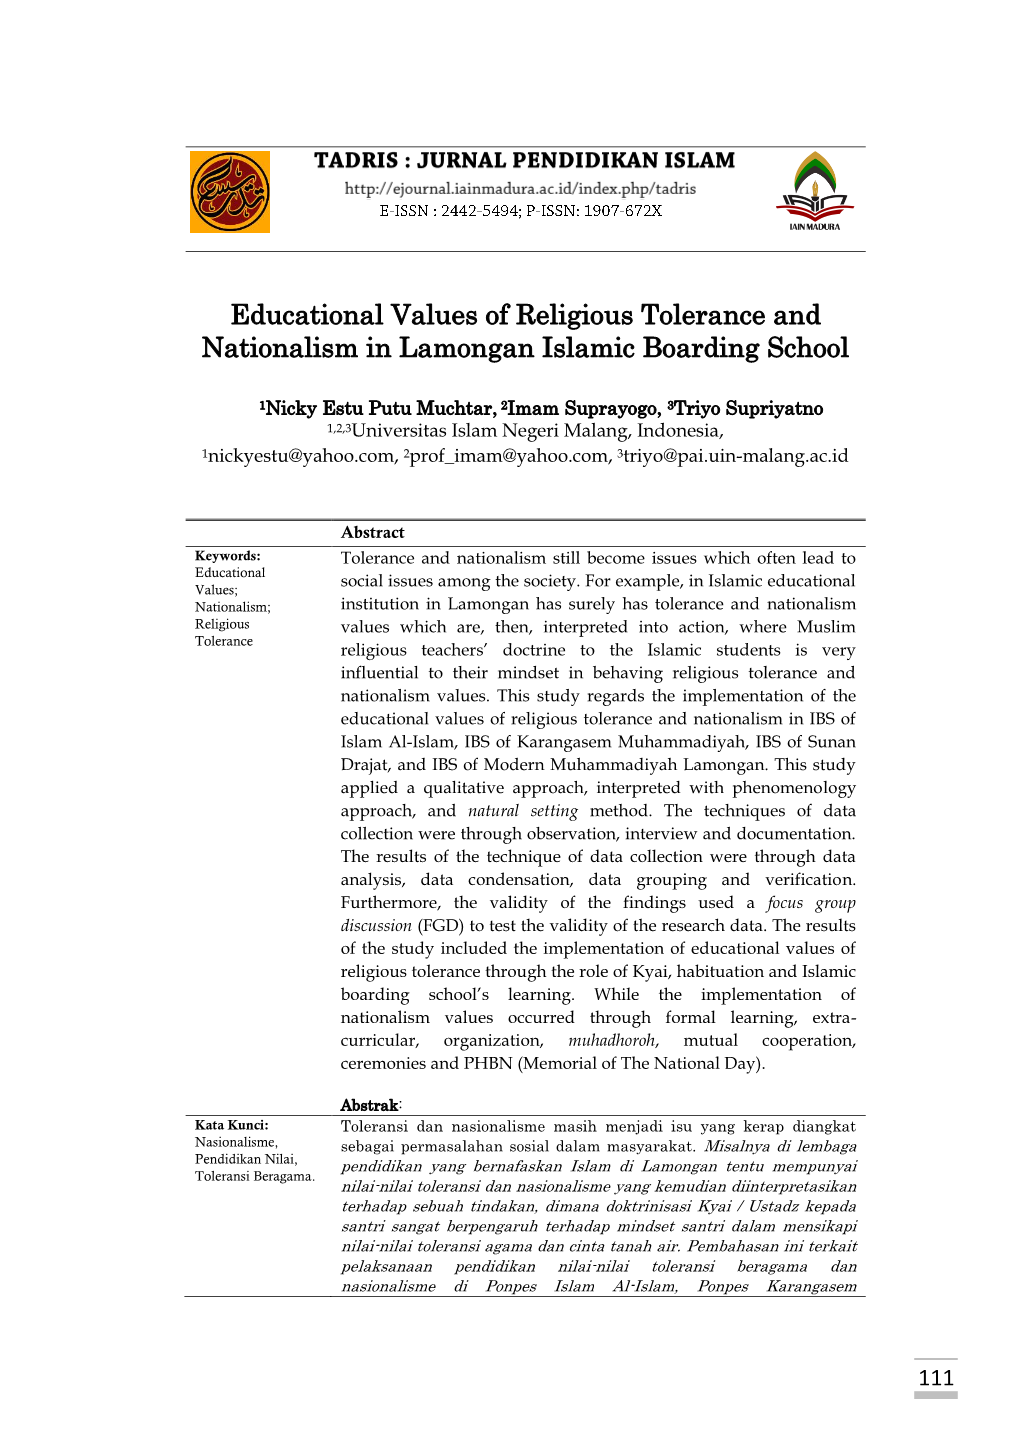 Educational Values of Religious Tolerance and Nationalism in Lamongan Islamic Boarding School